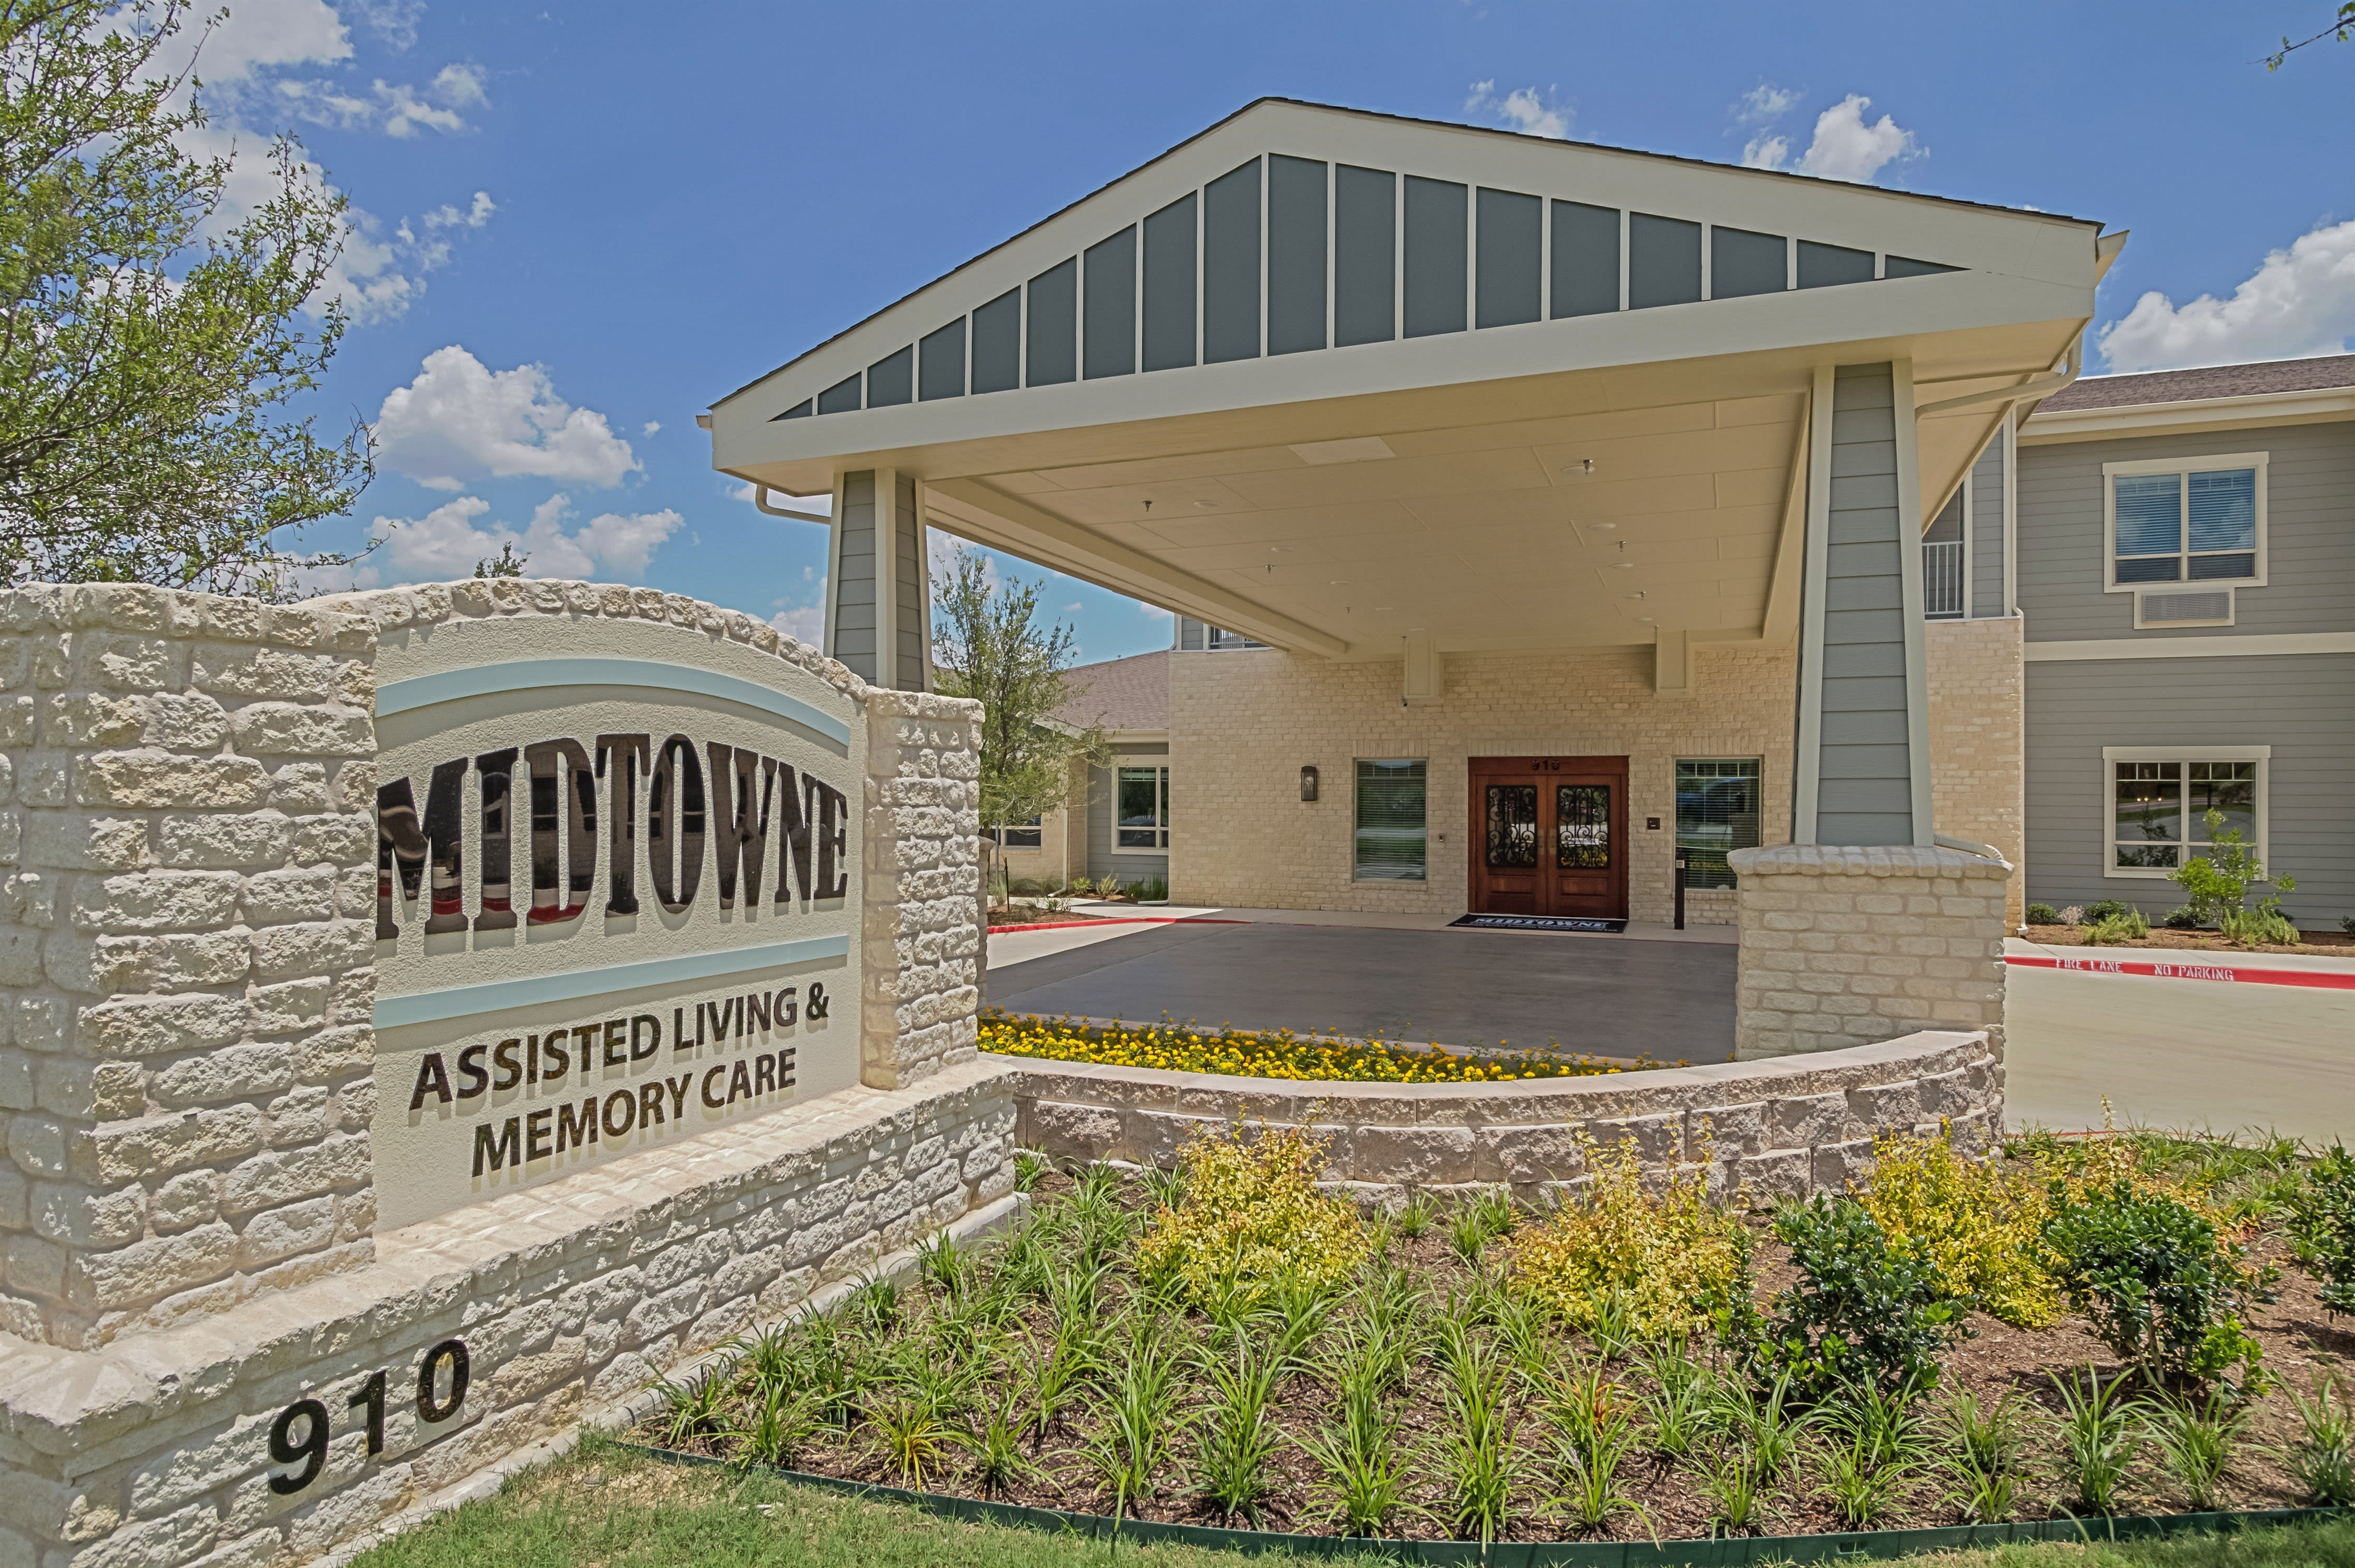 Midtowne Assisted Living and Memory Care outdoor common area